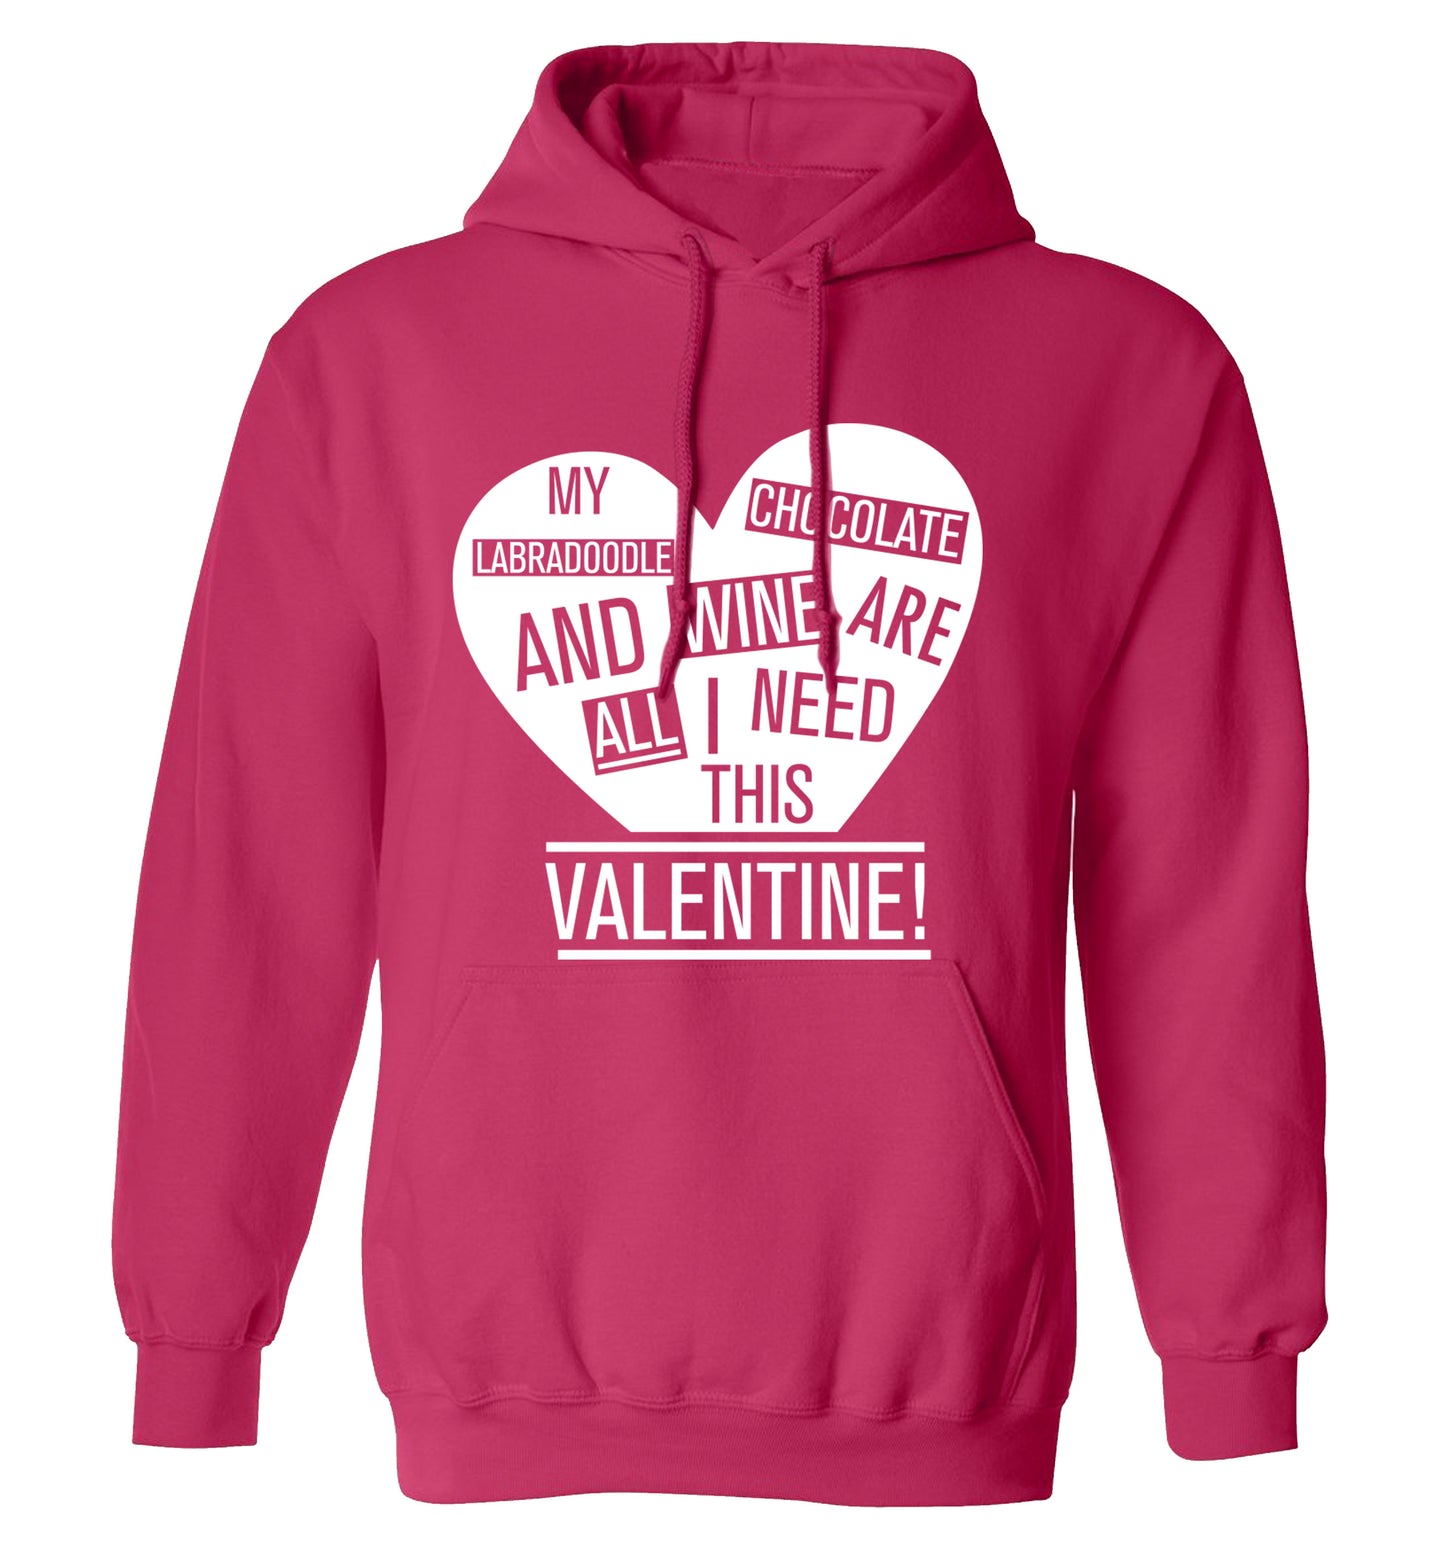 My labradoodle, chocolate and wine are all I need this valentine! adults unisex pink hoodie 2XL